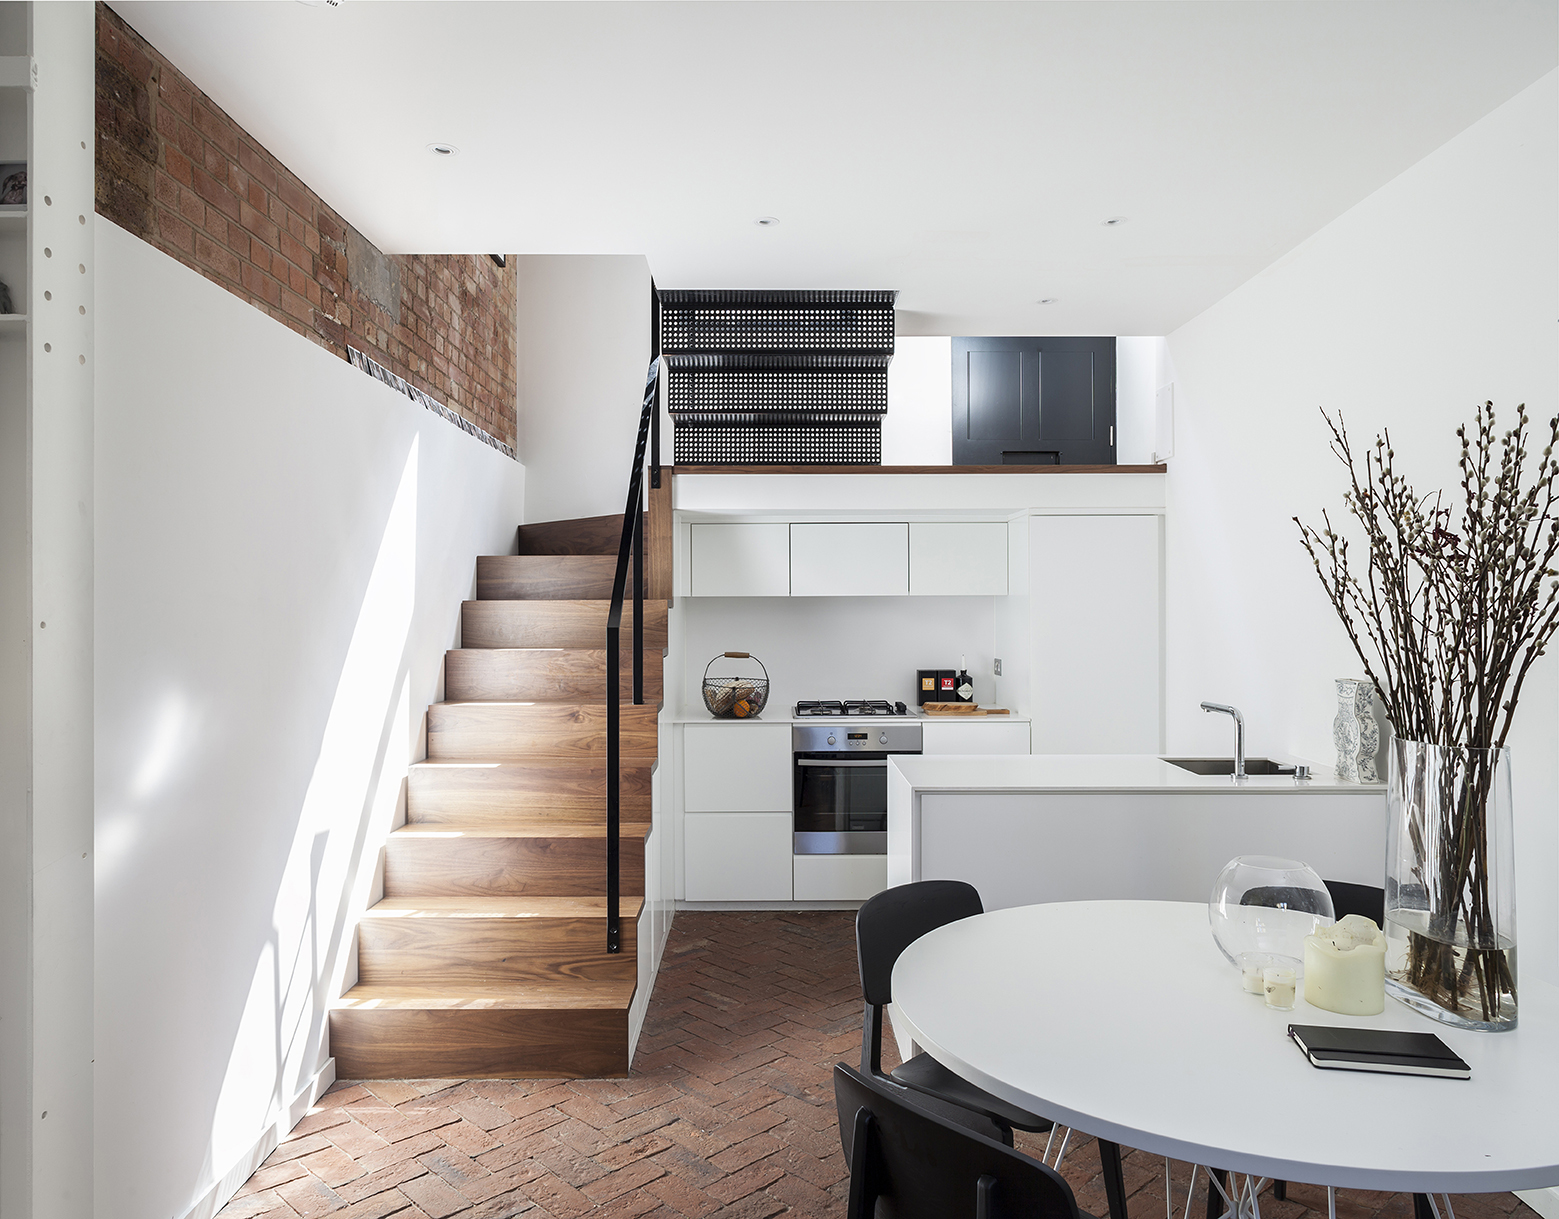 </p> <p>Find your ideal home design pro on designfor-me.com - get matched and see who's interested in your home project. Click image to see more inspiration from our design pros</p> <p>Design by Fiona, architectural designer from Hackney, London</p> <p>#architecture #homedesign #modernhomes #homeinspiration #kitchens #kitchendesign #kitcheninspiration #kitchenideas #kitchengoals #staircases #staircasedesign #staircaseinspiration #staircaseideas #staircasedesignideas </p> <p>